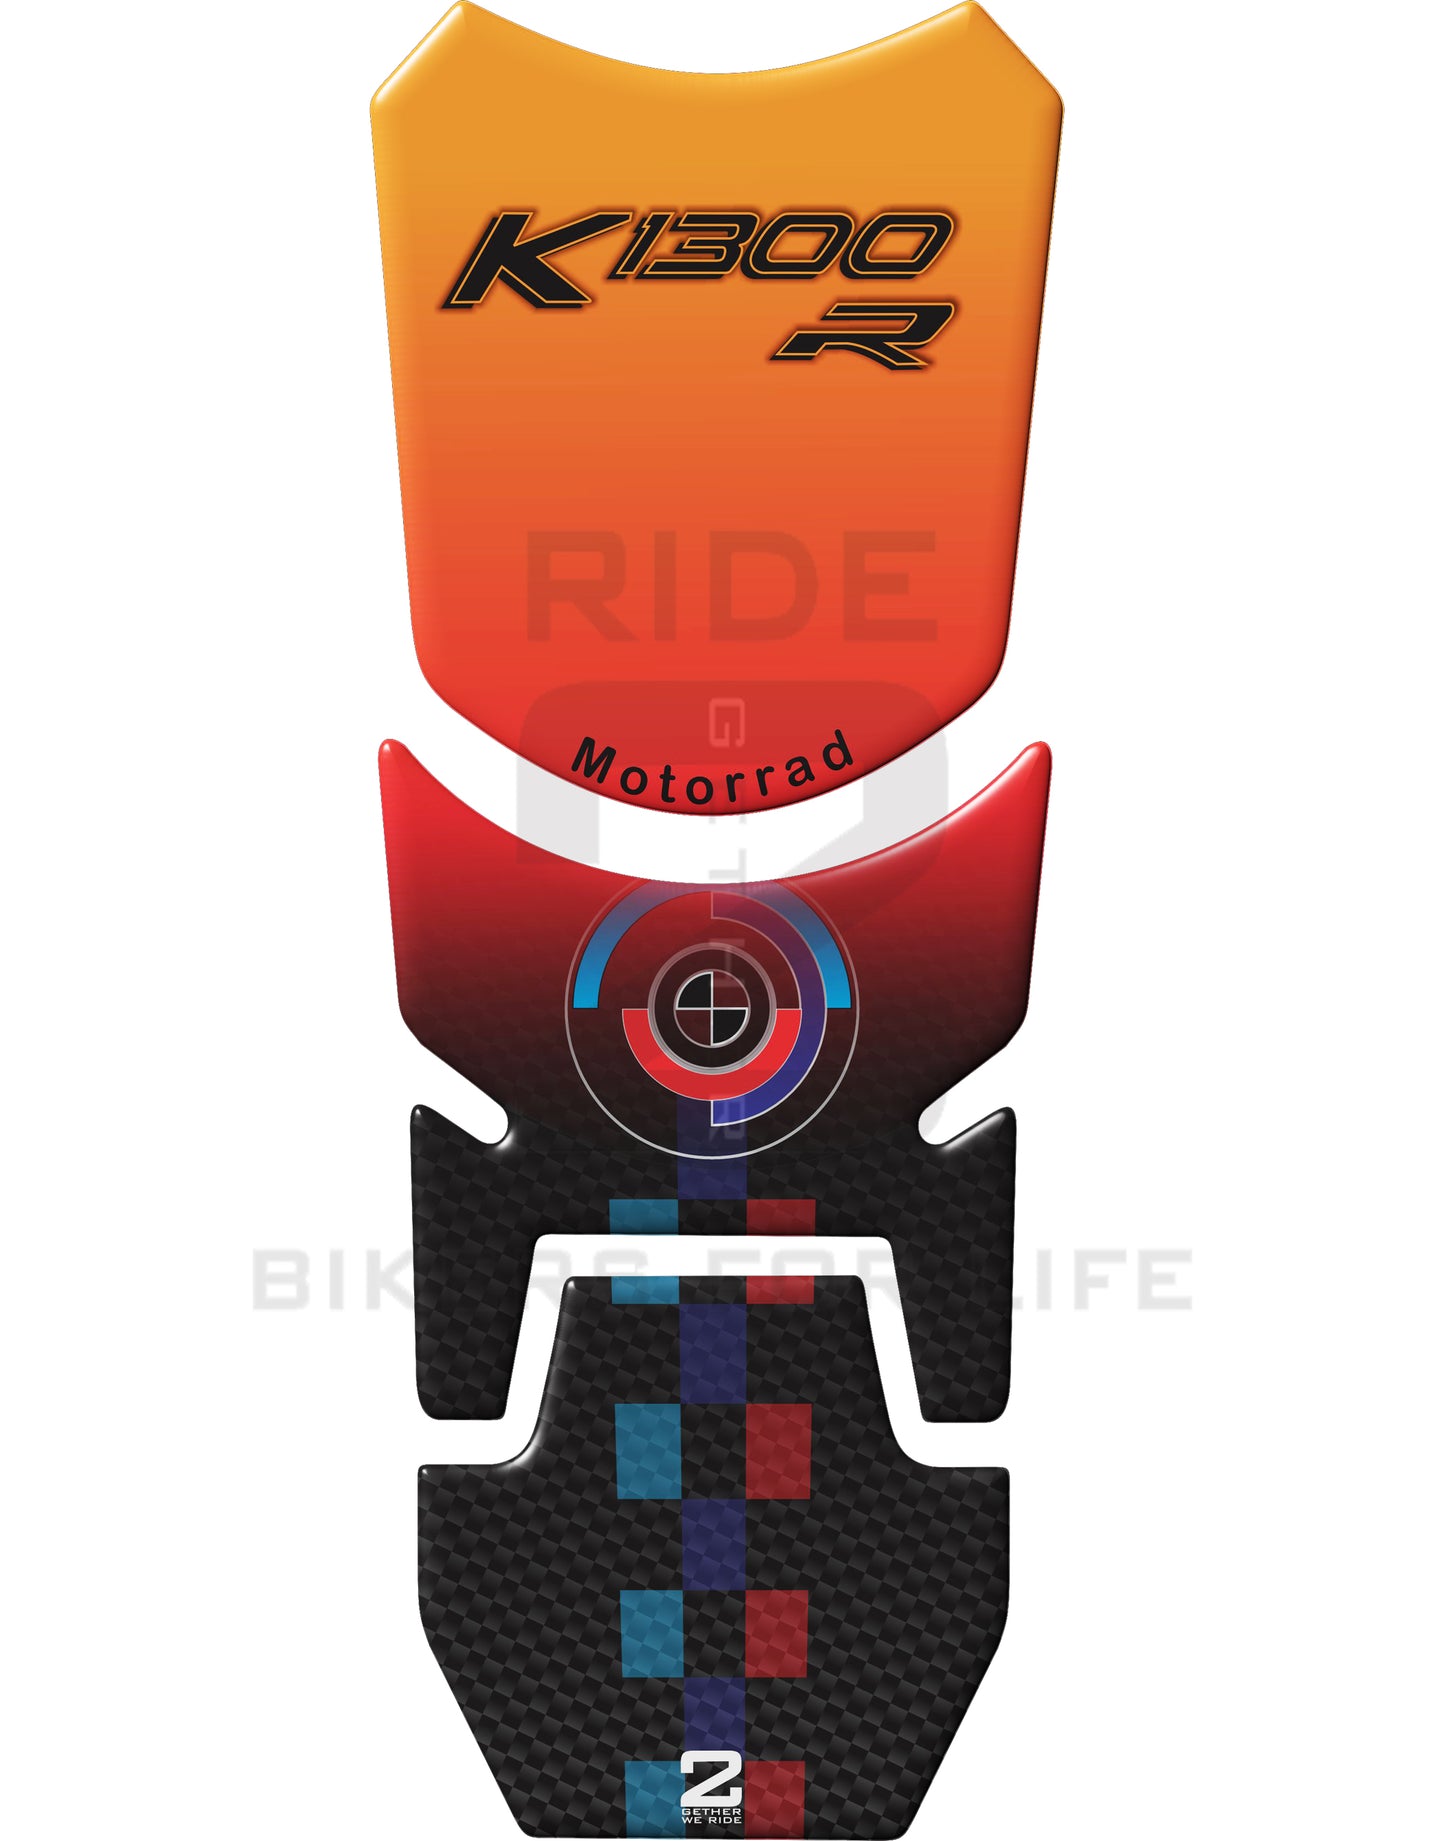 The BMW K 1300 R Orange and Black Tank Pad is a protective accessory designed specifically for the BMW K 1300 R motorcycle model.